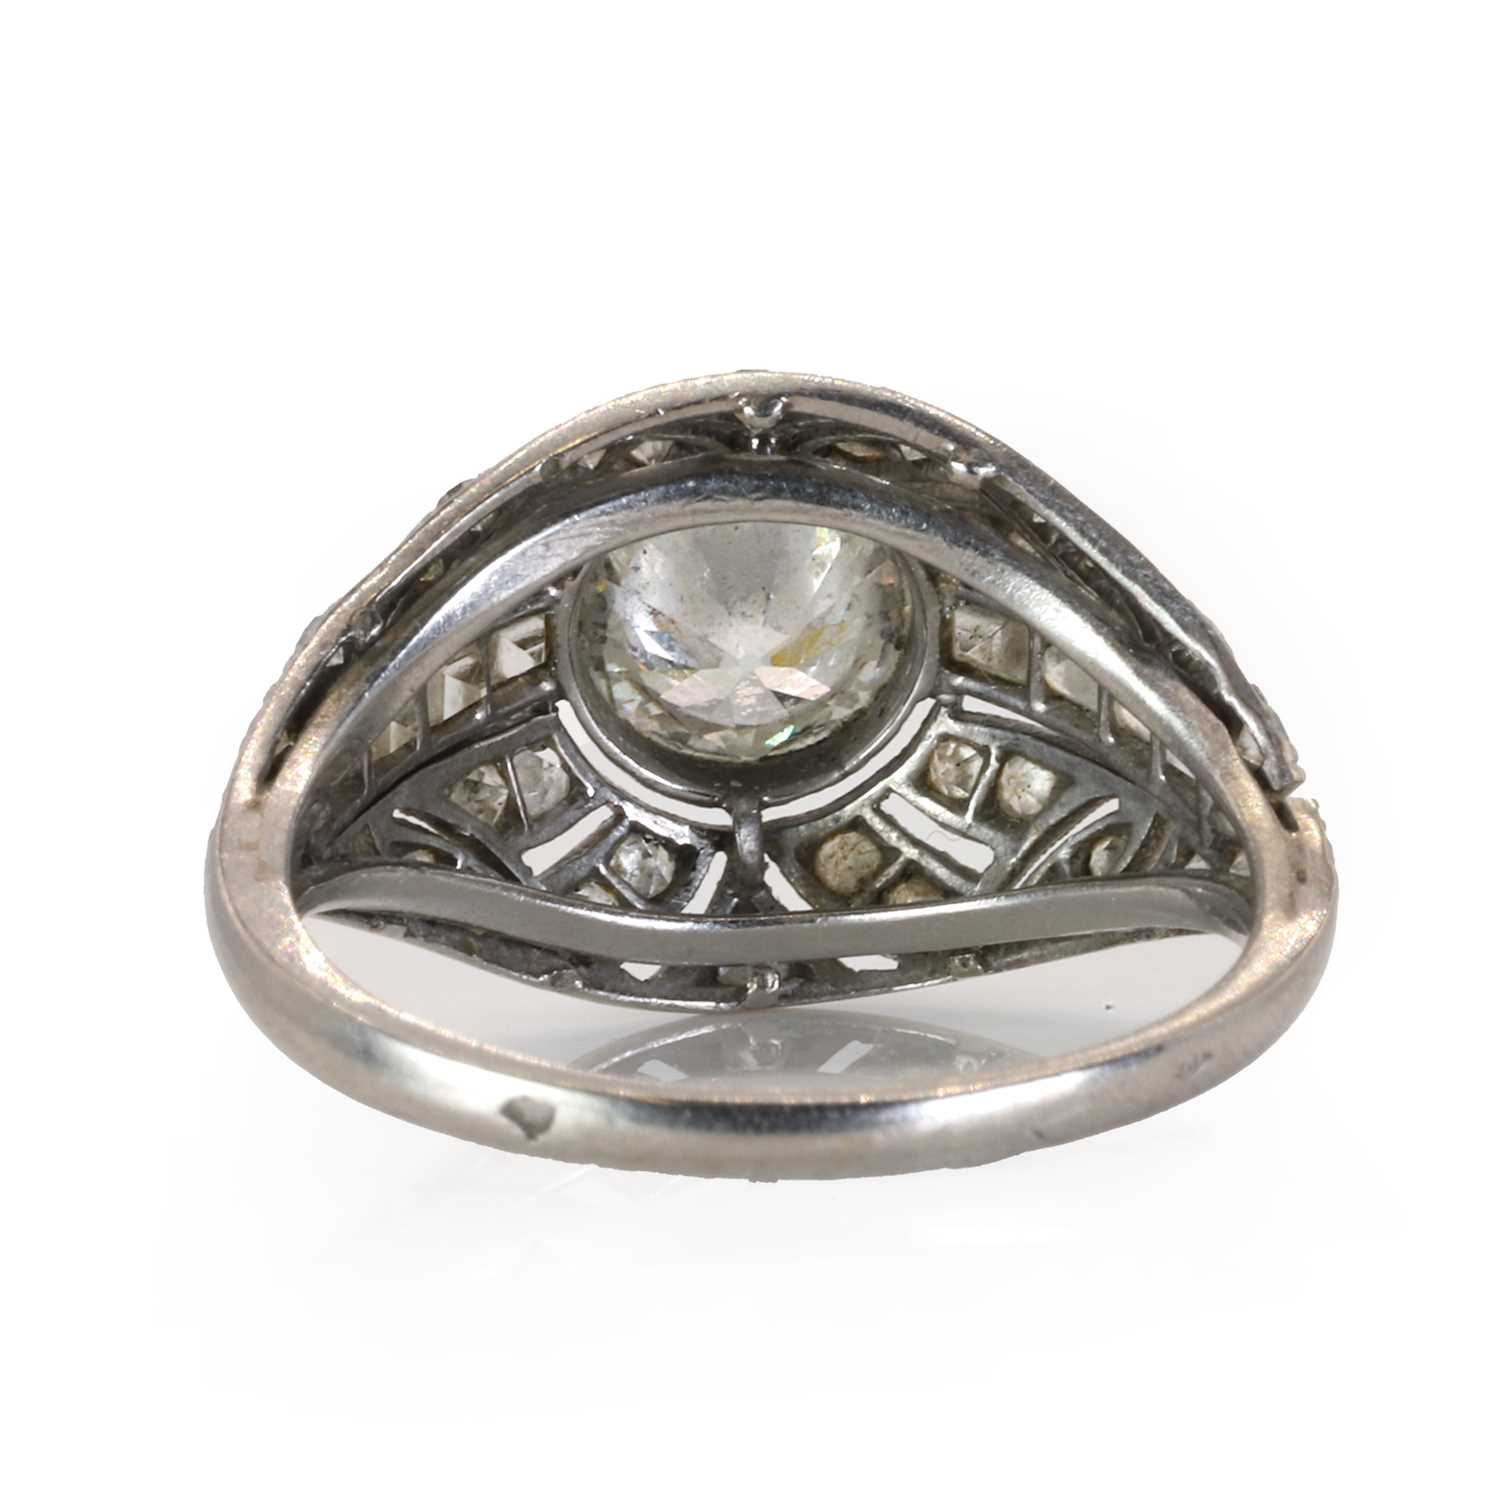 A French Art Deco platinum and diamond bombé ring, - Image 3 of 7